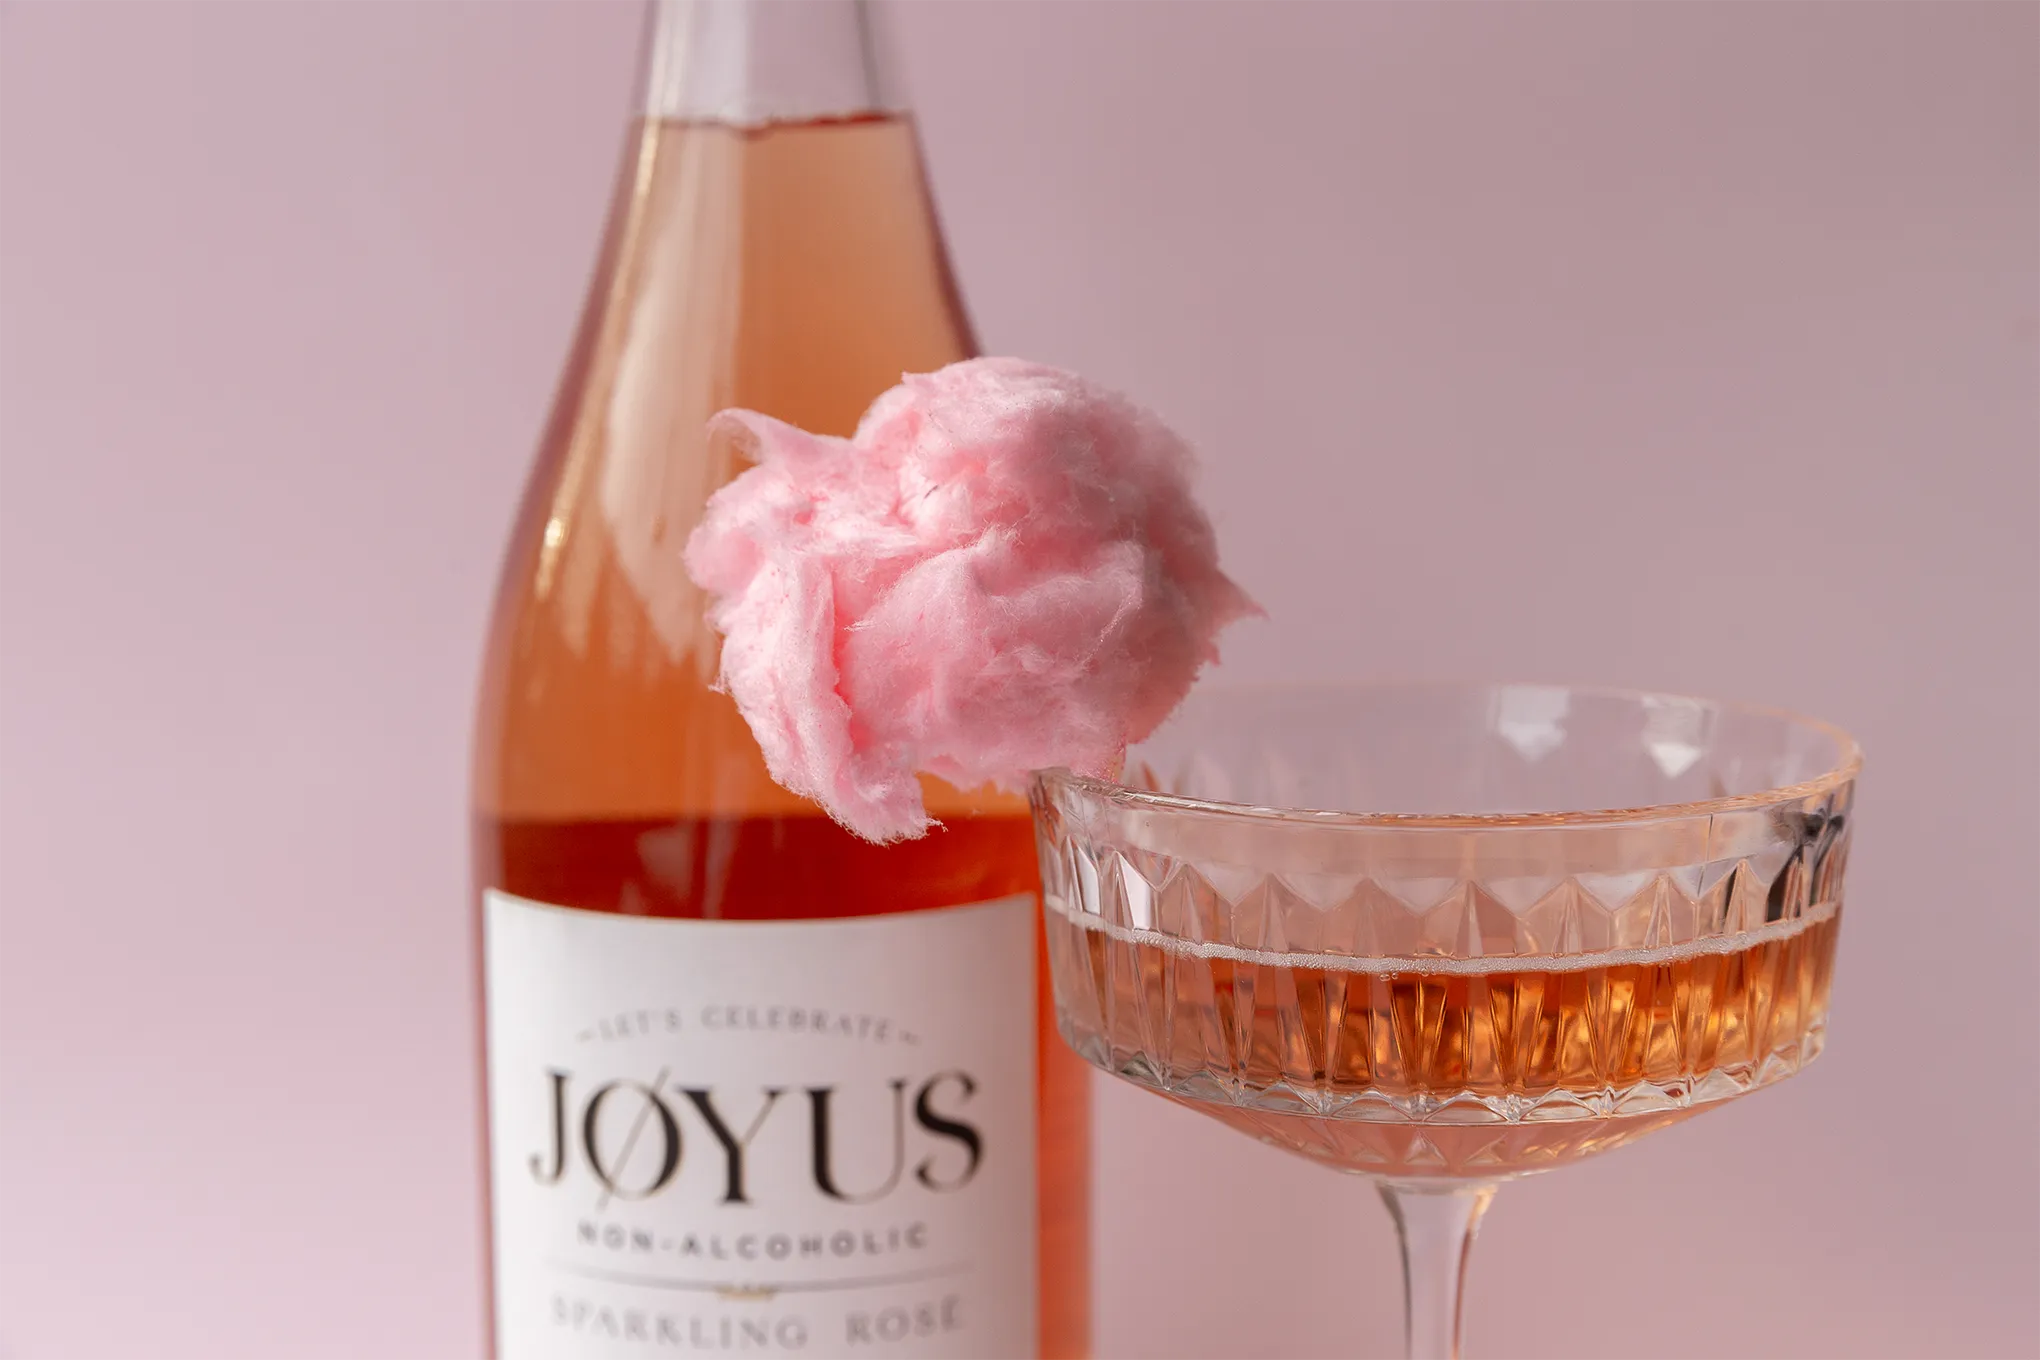 one bottle of Joyus nonalcoholic sparkling rosé close up. Also in frame is a close up of the fluffy pink cotton candy garnish on a cut crystal coupe champagne glass with Joyus in it.